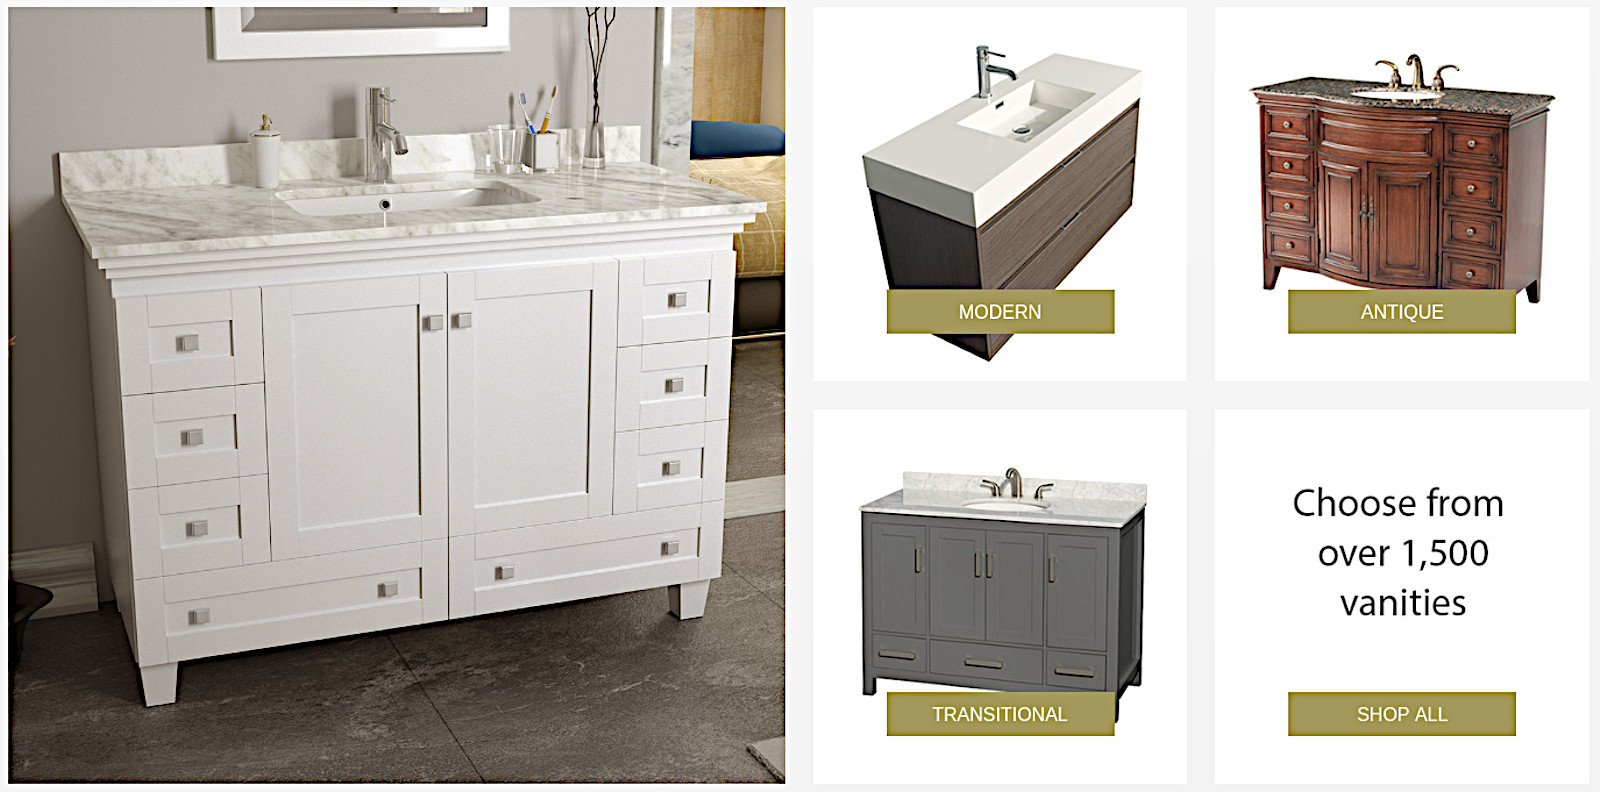 Discounted modern antique transitional vanities